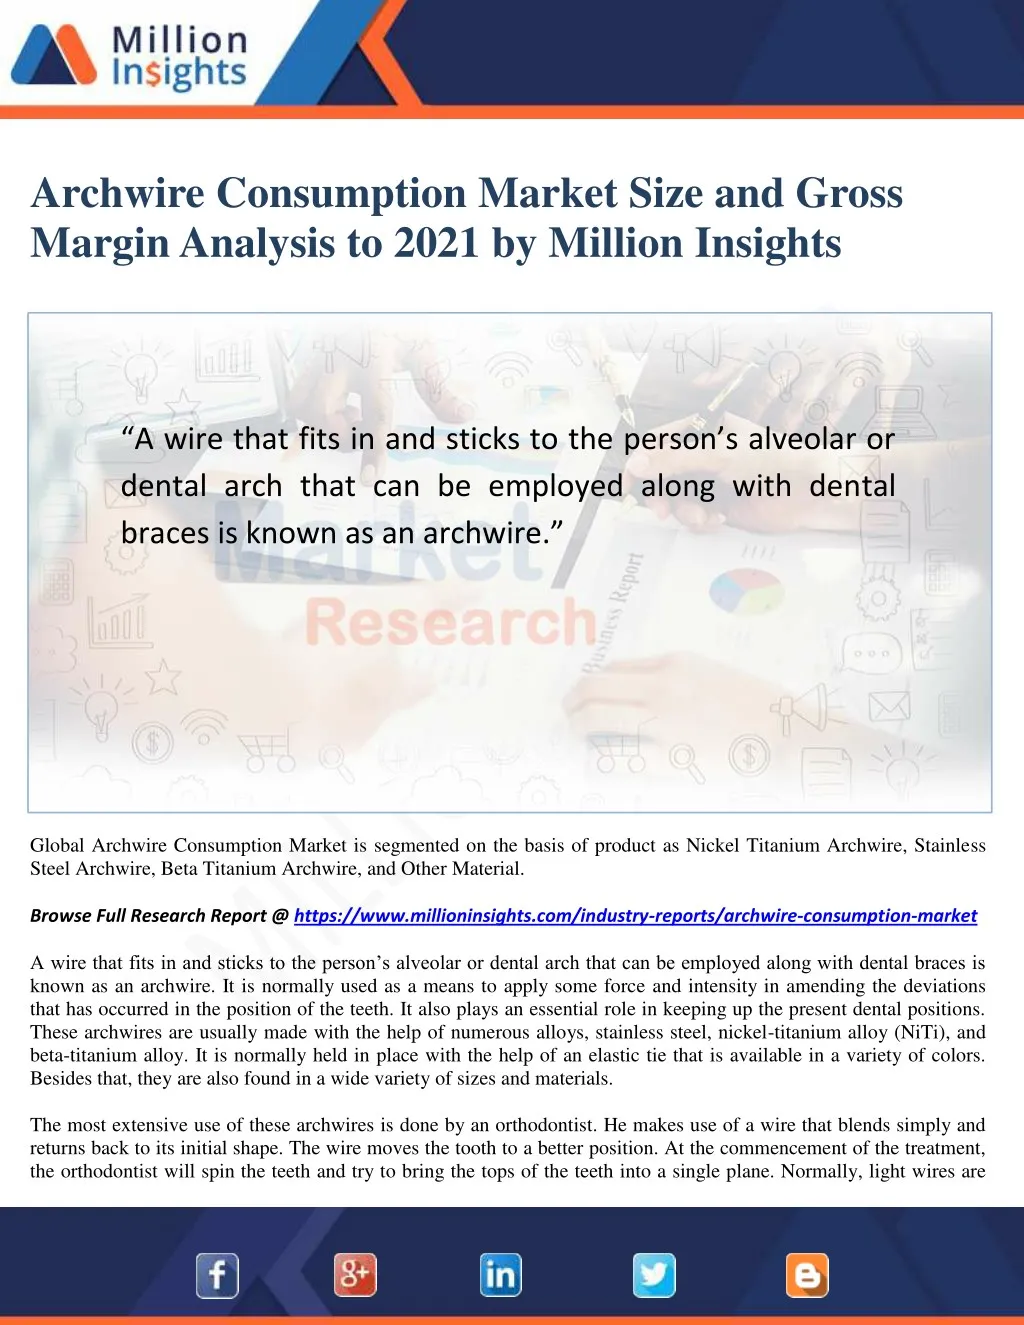 archwire consumption market size and gross margin